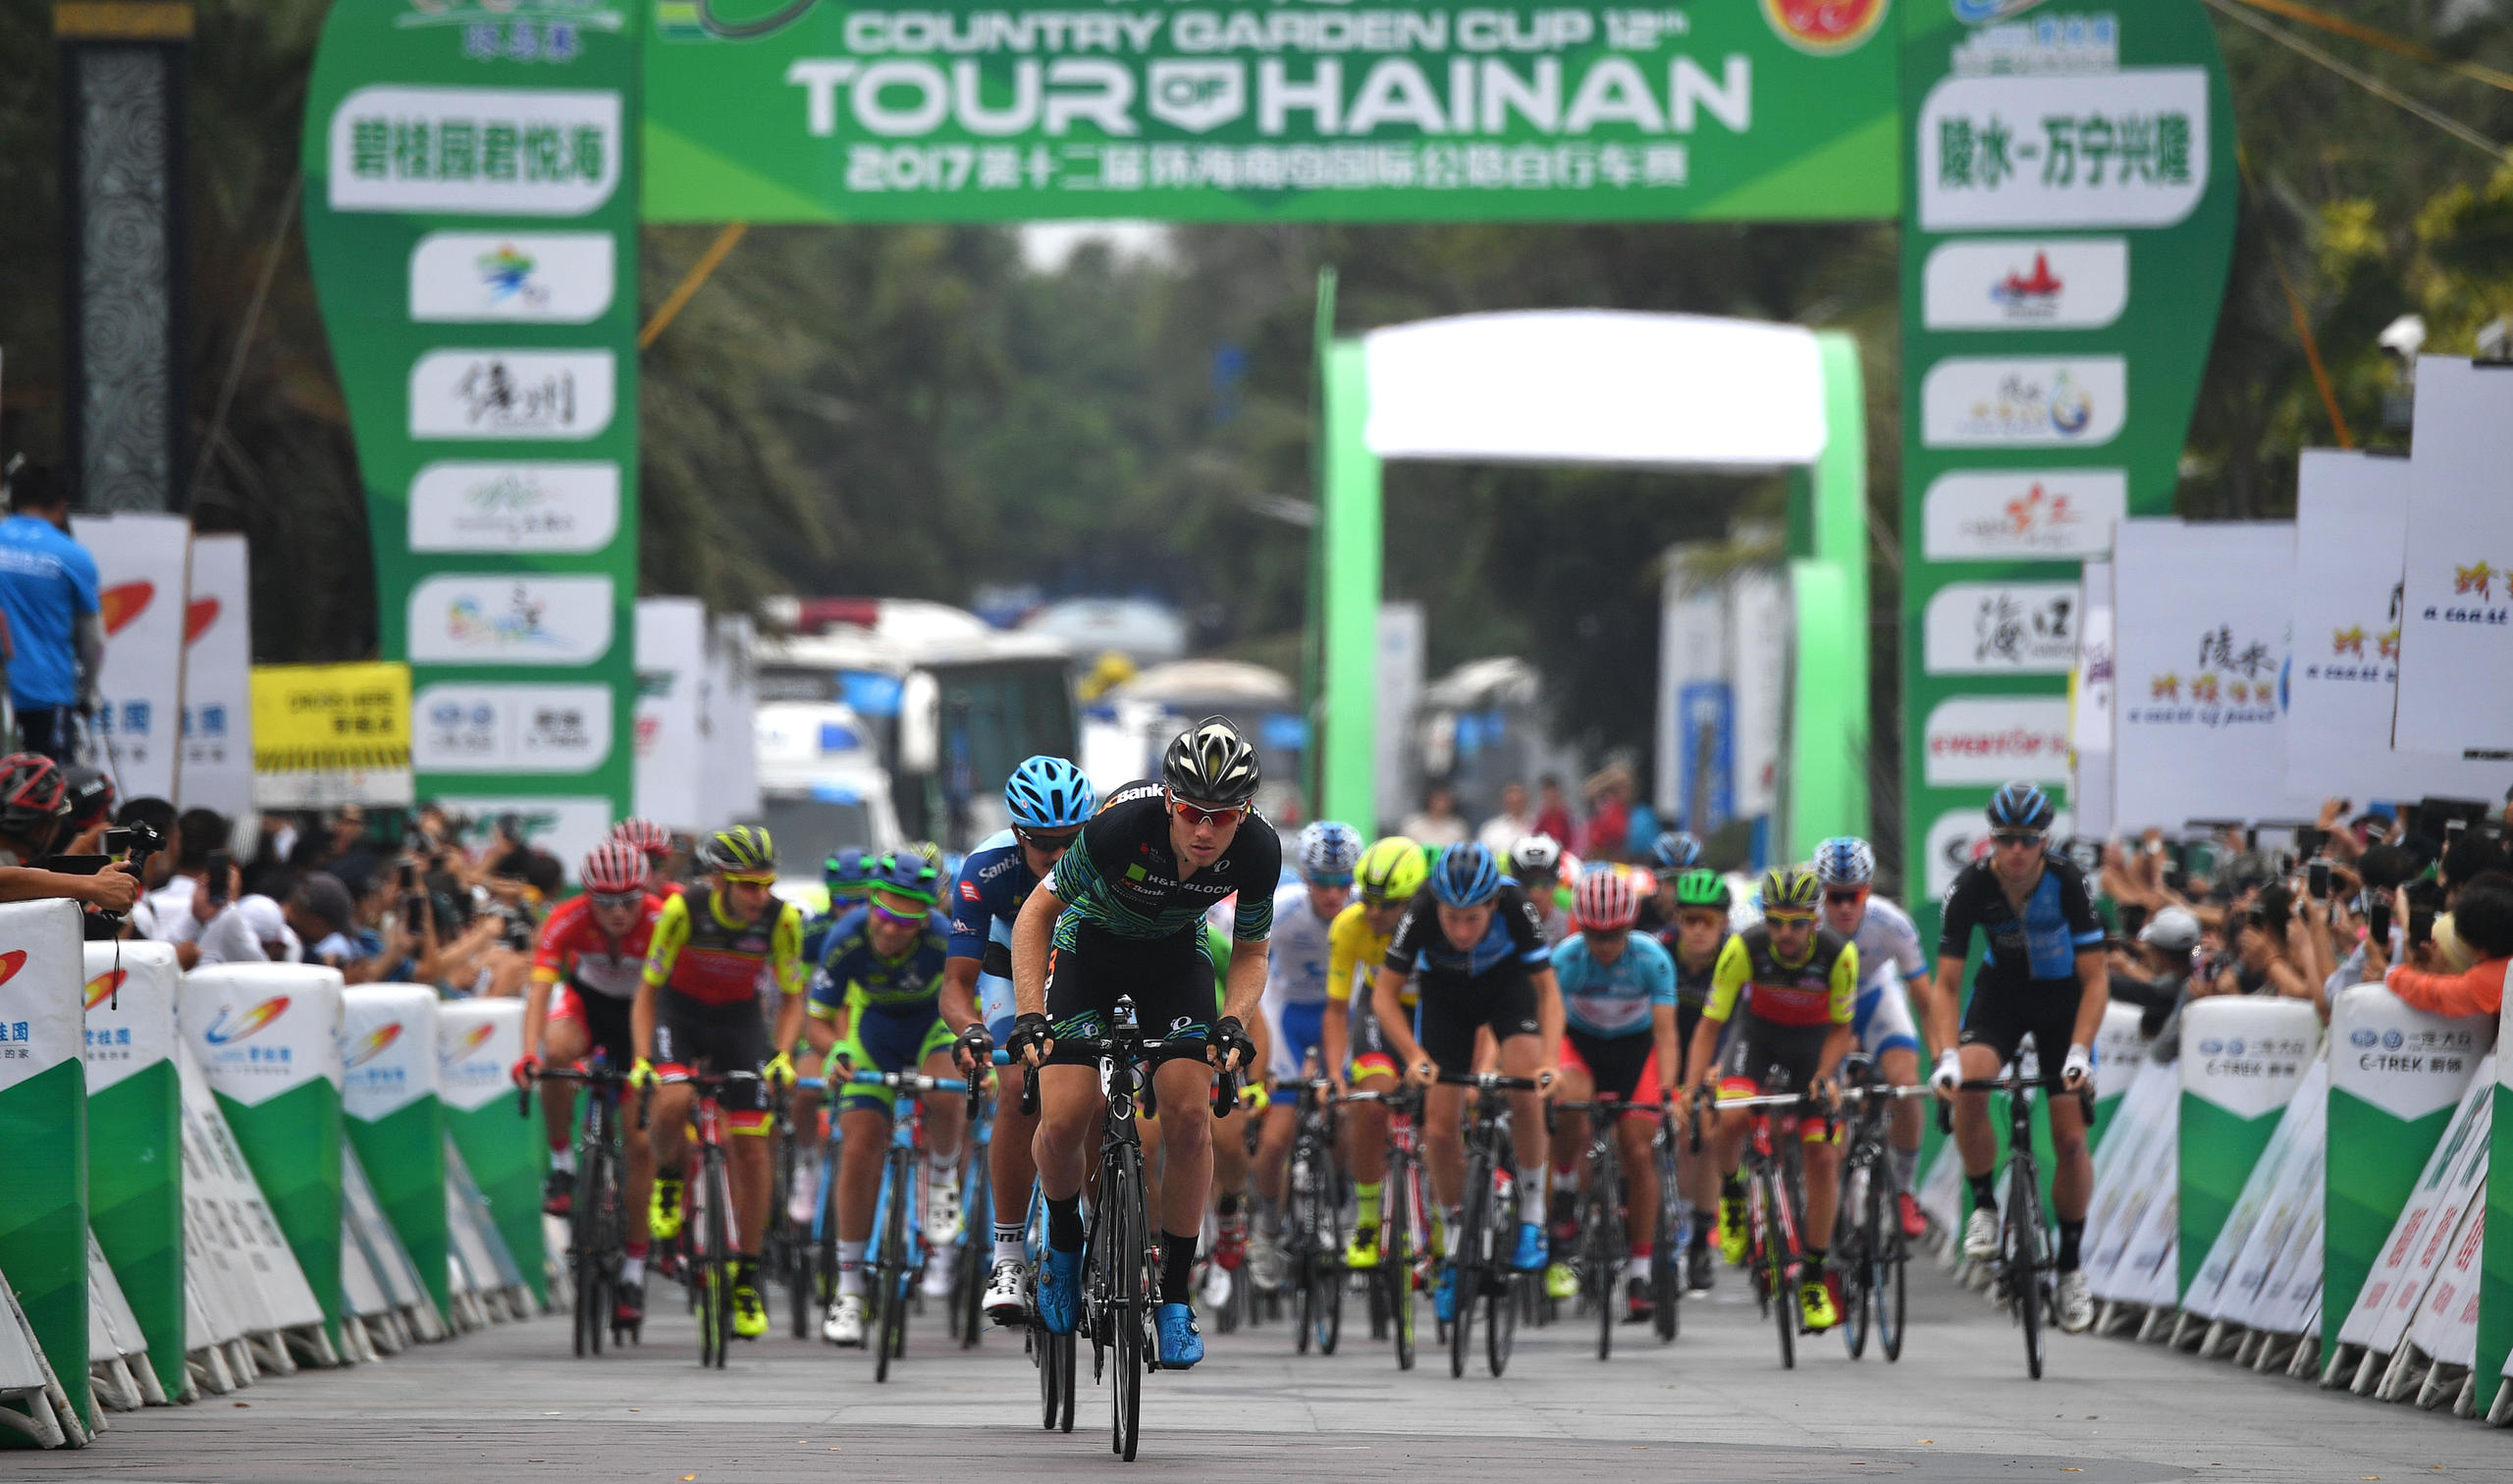 cyclists competing in the tour of hainan